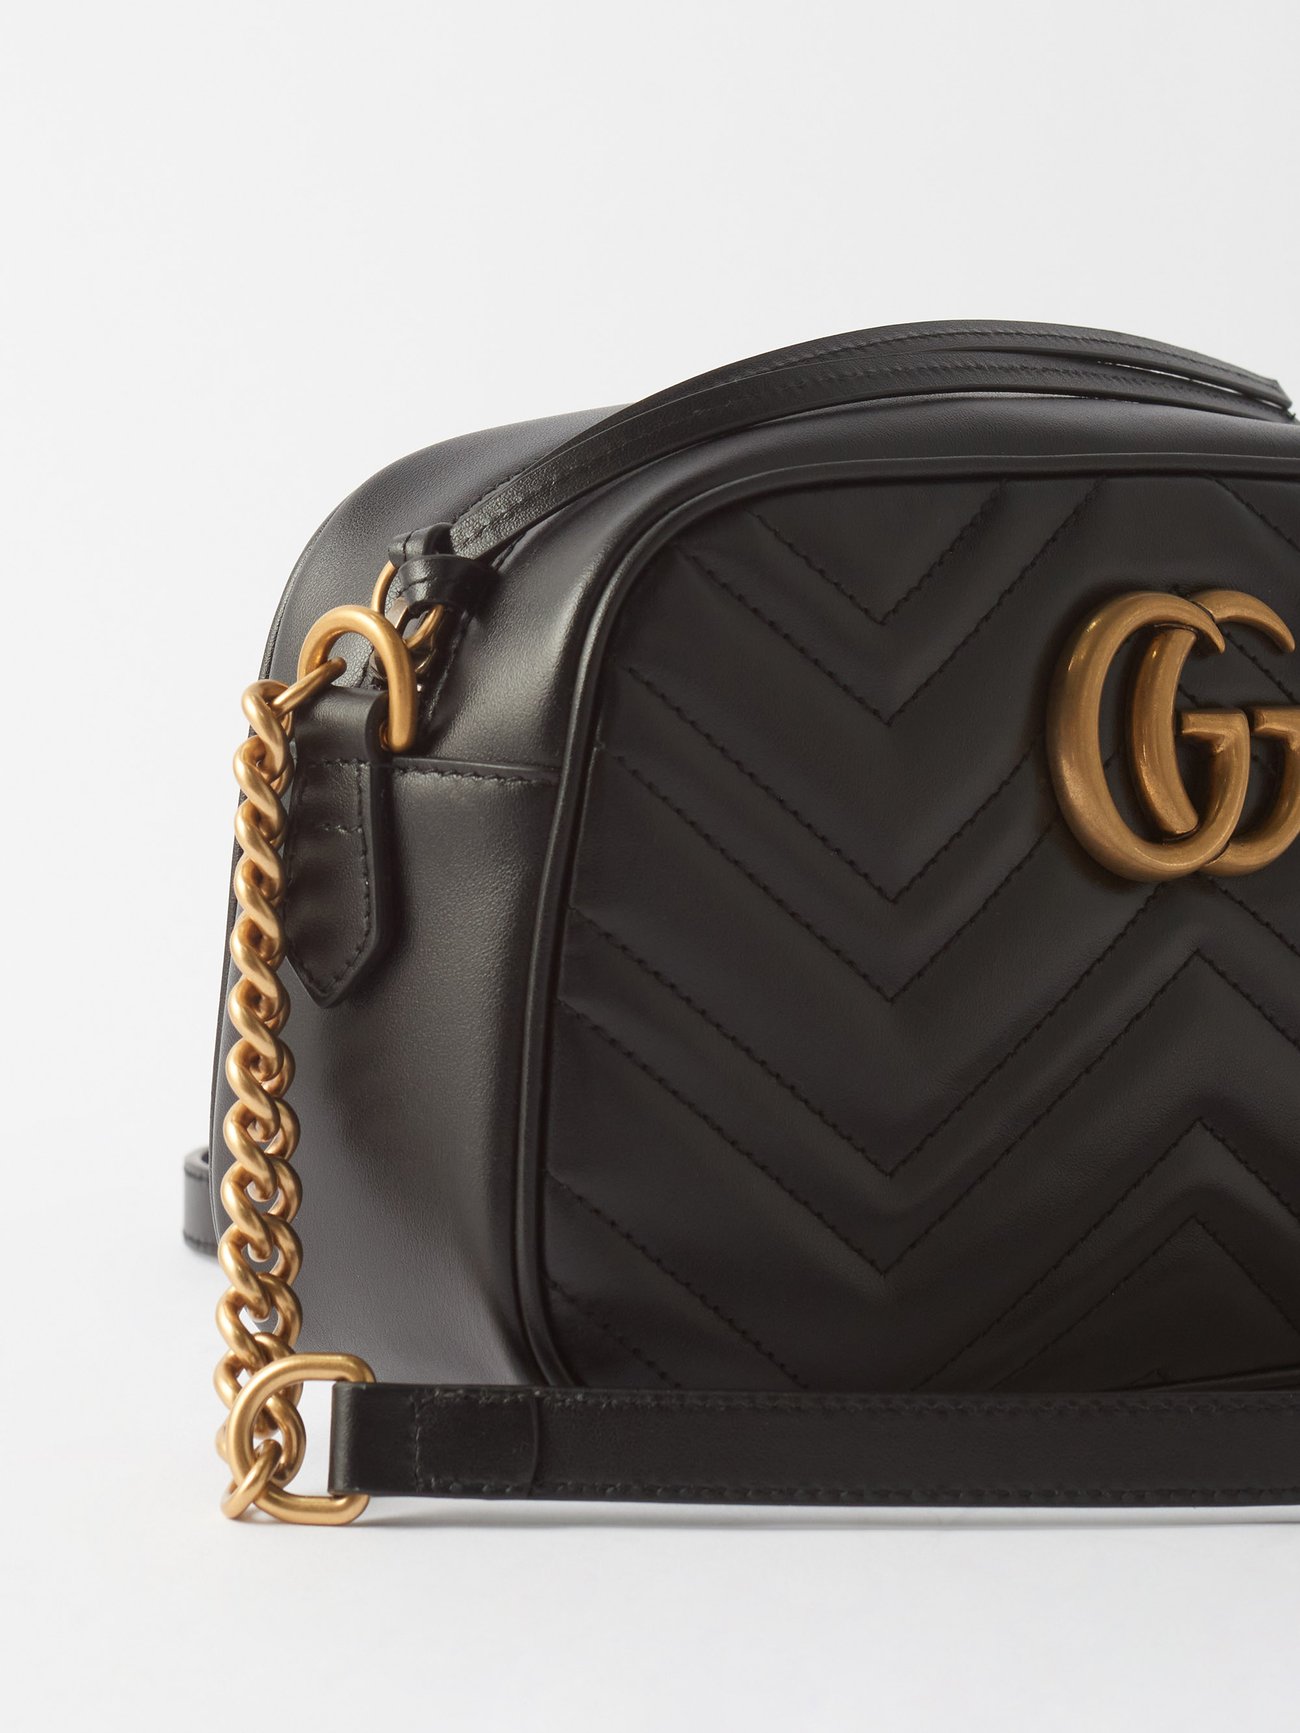 GUCCI GG Marmont Black Lamb Quilted Leather Gold Chain Cross-Body Camera Bag